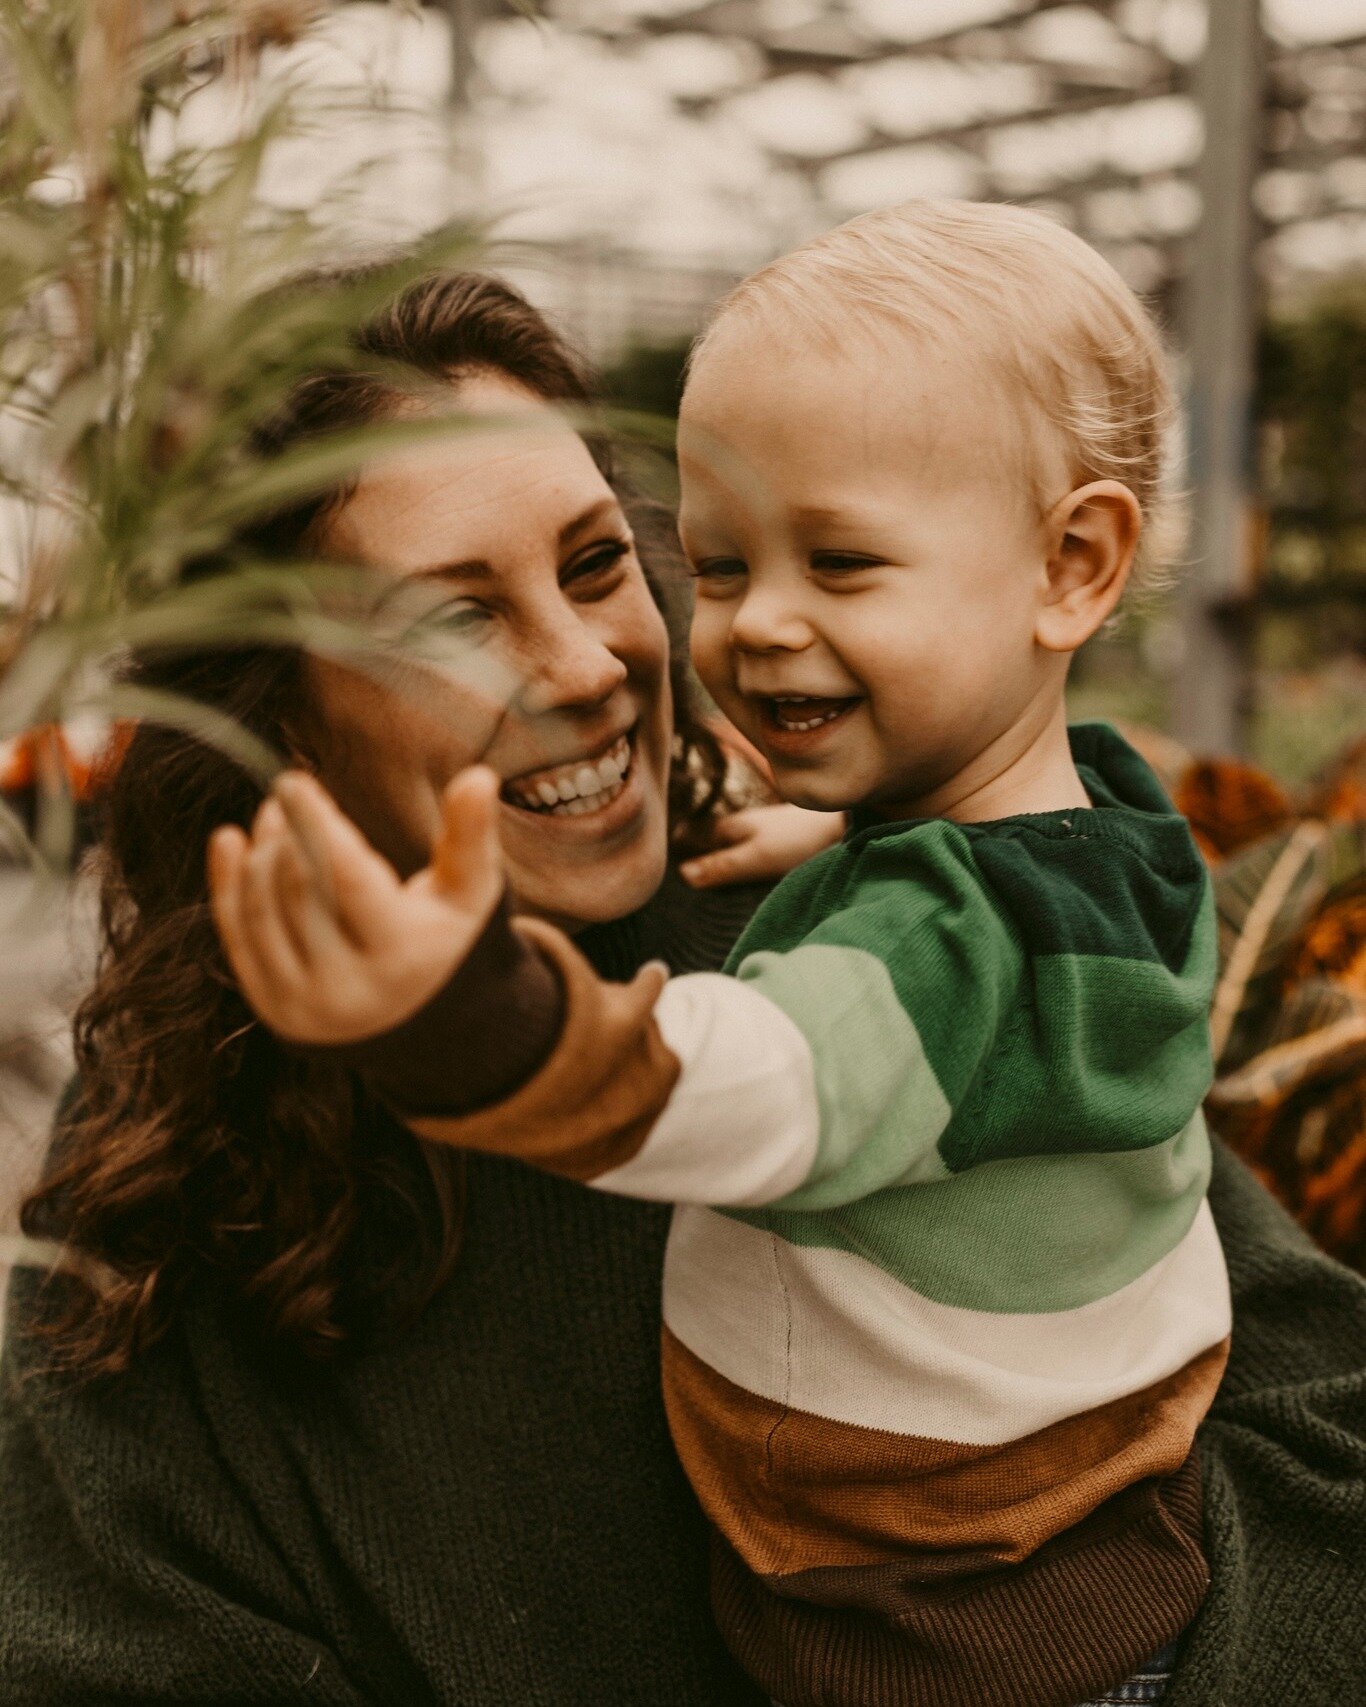 SUMMER AVAILABILTY:
I do have some dates open for family sessions this summer, reach out ASAP to get yours booked! 
https://purelybrookephoto.com/familysessions